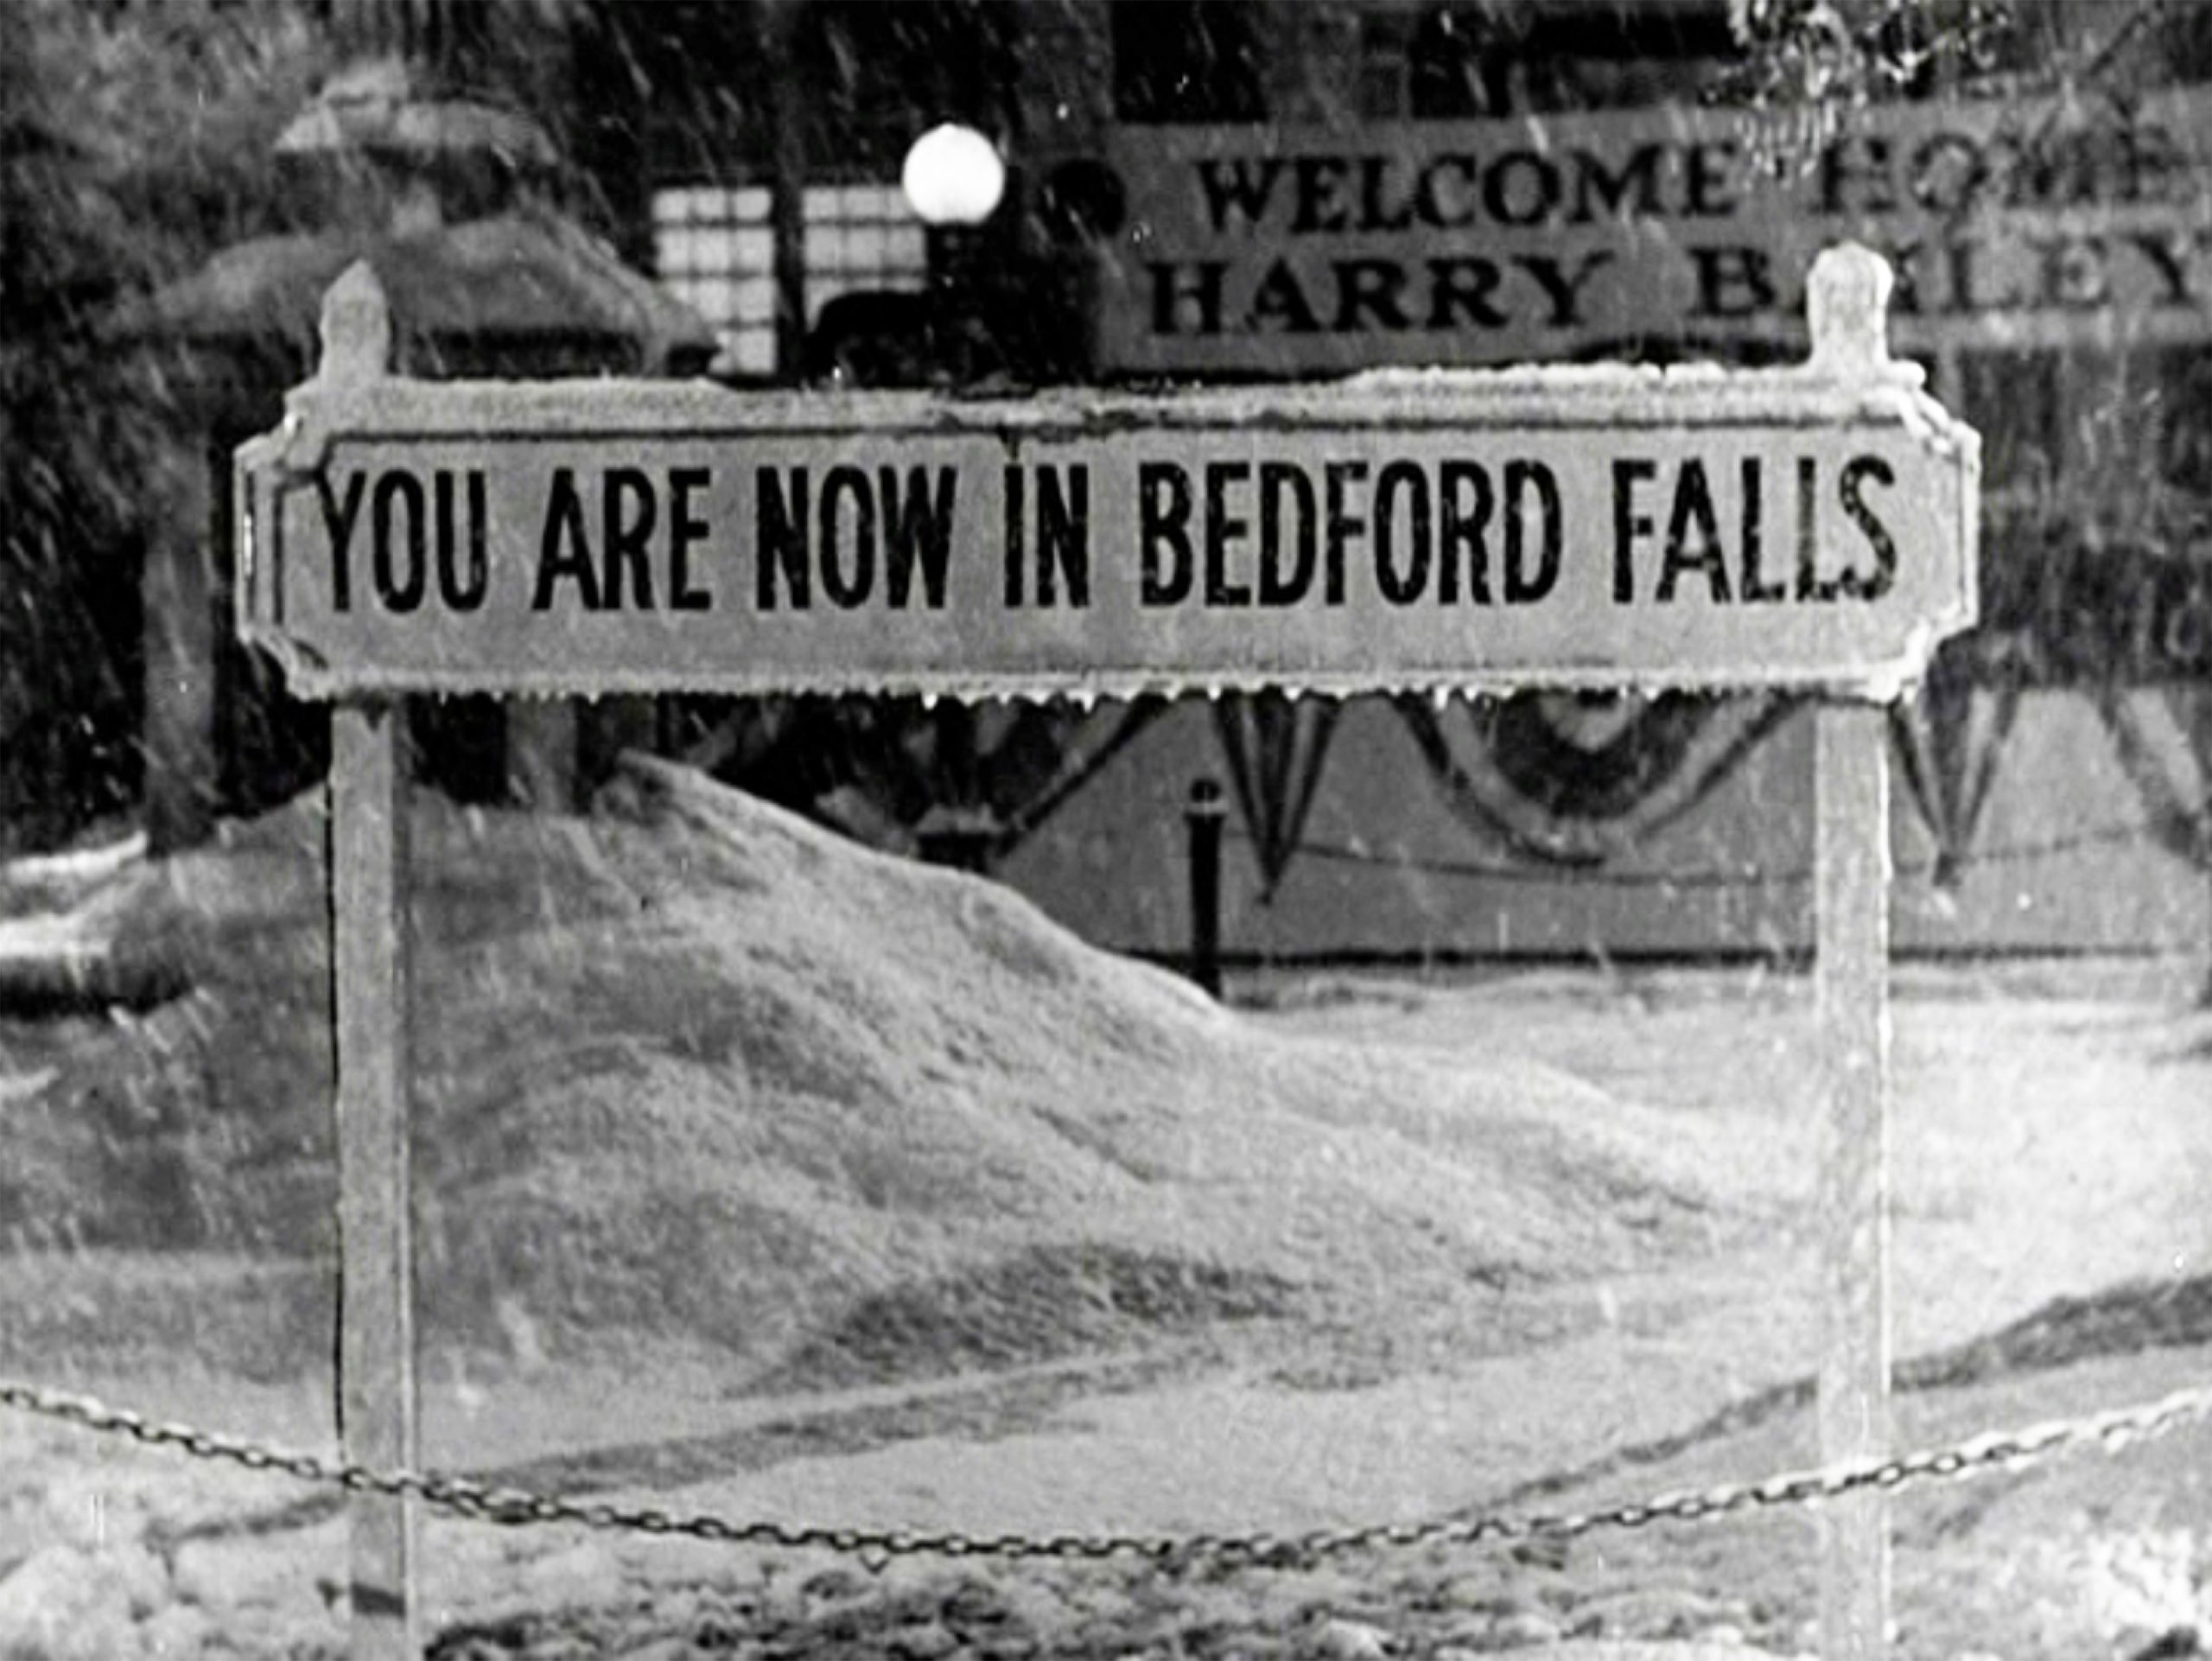 The Real Bedford Falls? 'It's a Wonderful Life' Was Inspired By This